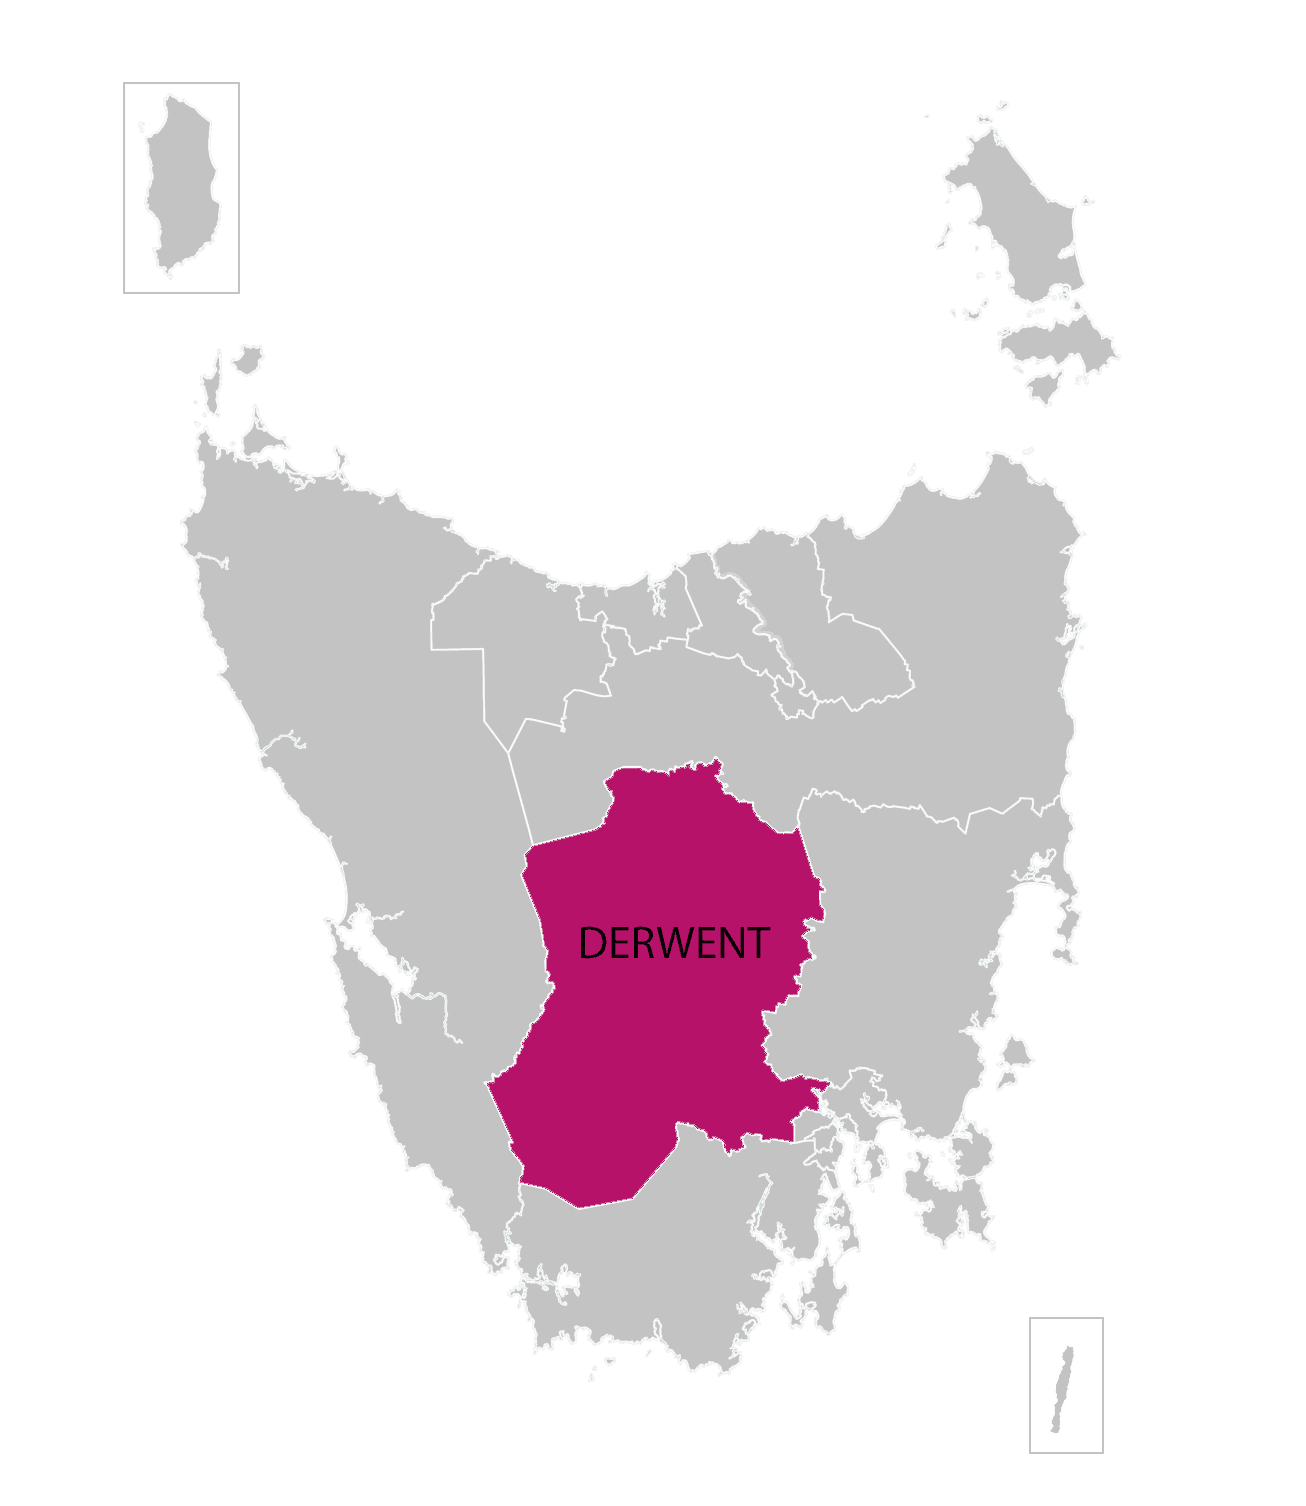 Derwent division highlighted on illustrated map of Tasmania